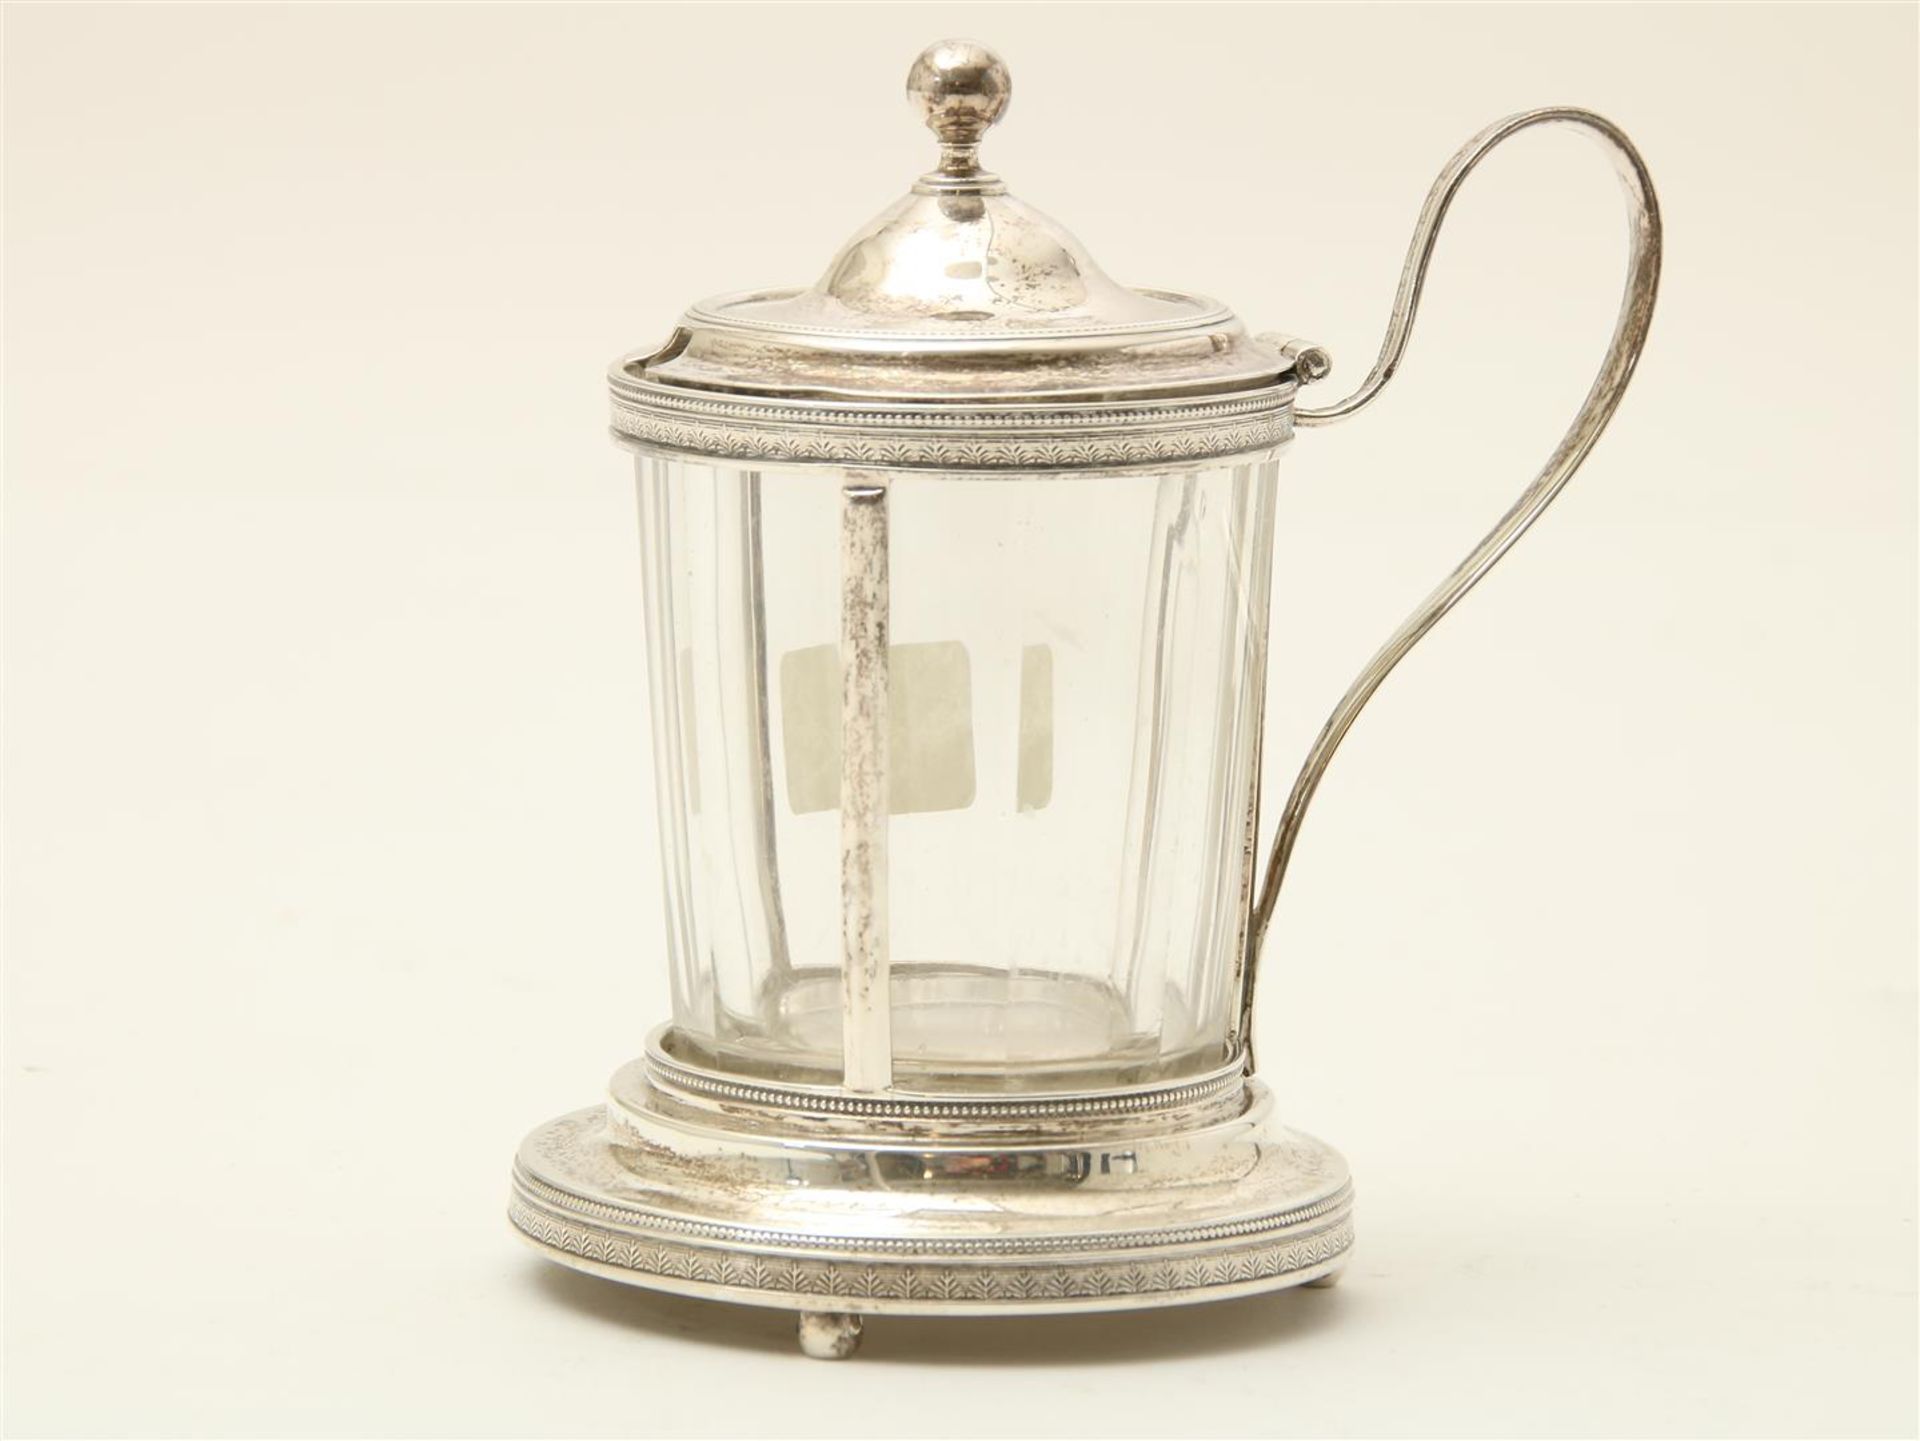 Silver mustard pot with glass inner container, Amsterdam, circa 1800, height approximately 10.5